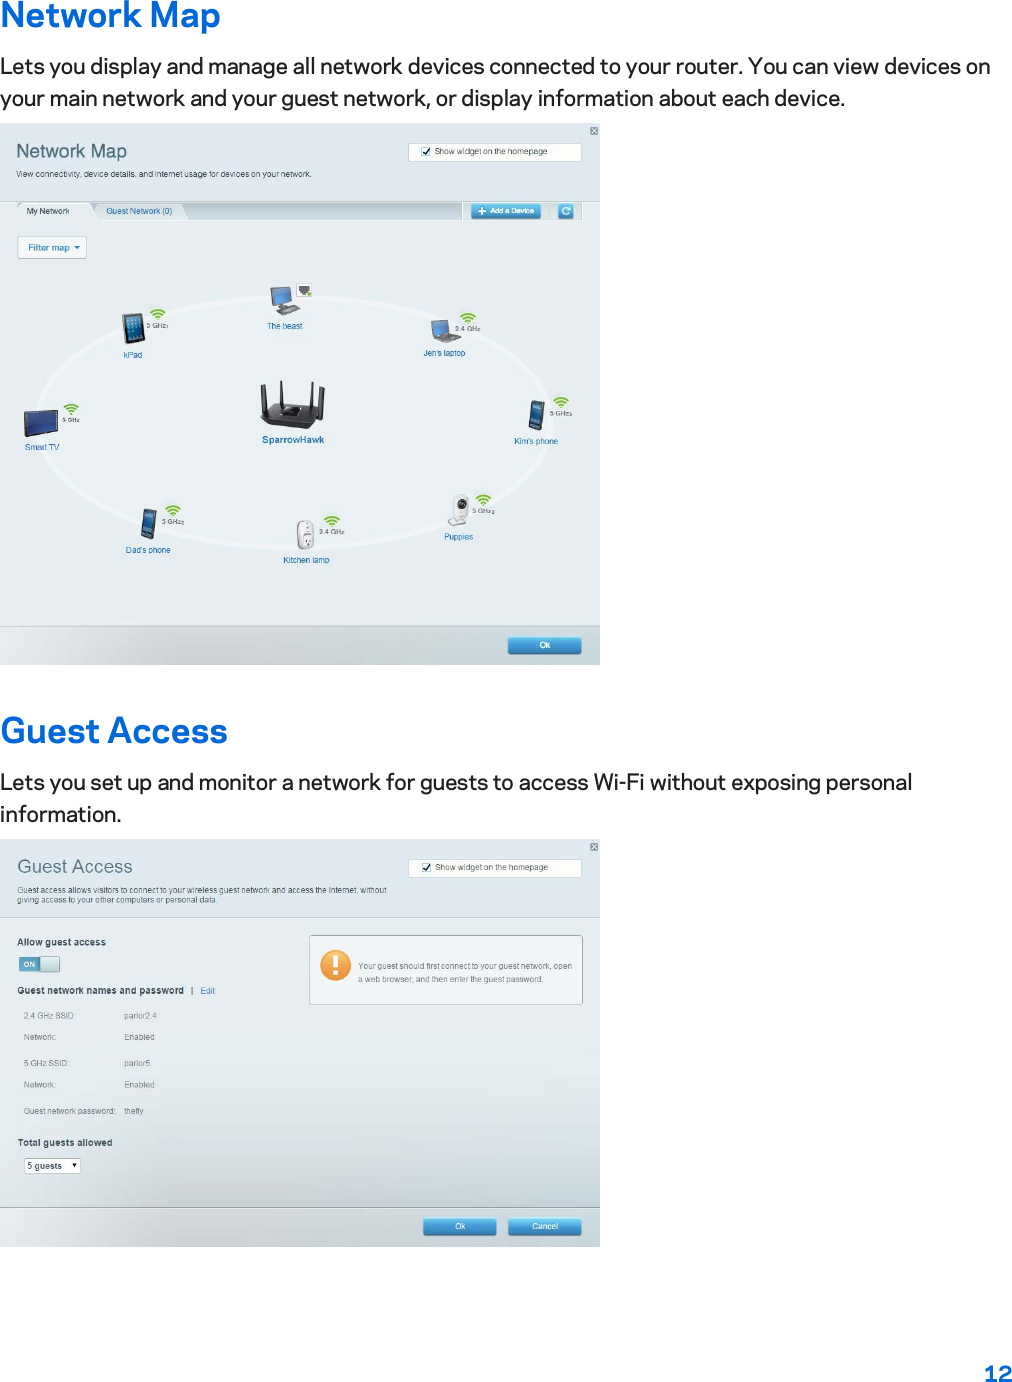 12  Network Map Lets you display and manage all network devices connected to your router. You can view devices on your main network and your guest network, or display information about each device.  Guest Access Lets you set up and monitor a network for guests to access Wi-Fi without exposing personal information.  